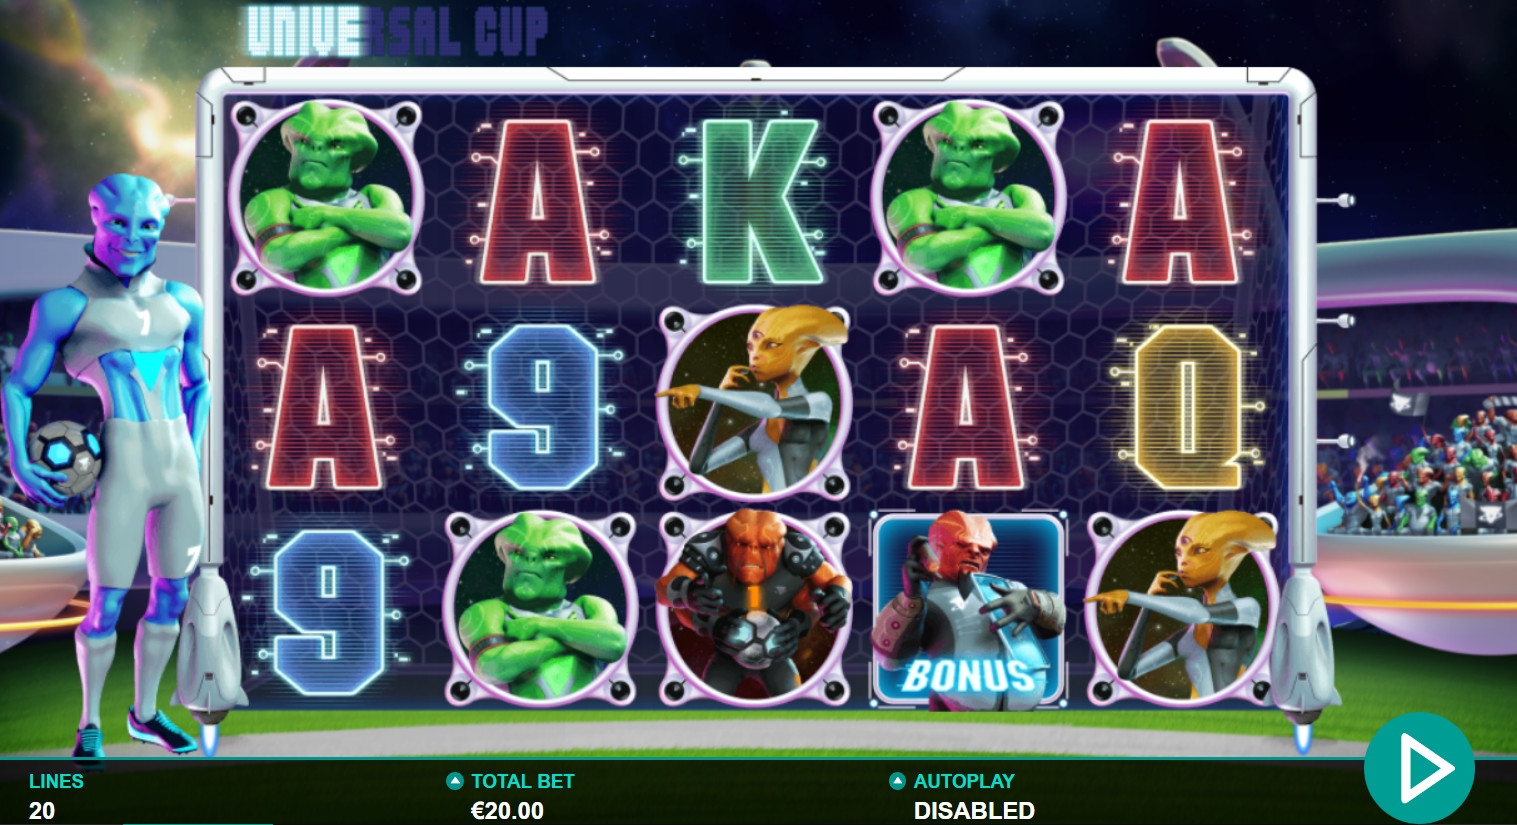 Universal Cup (Universal Cup) from category Slots